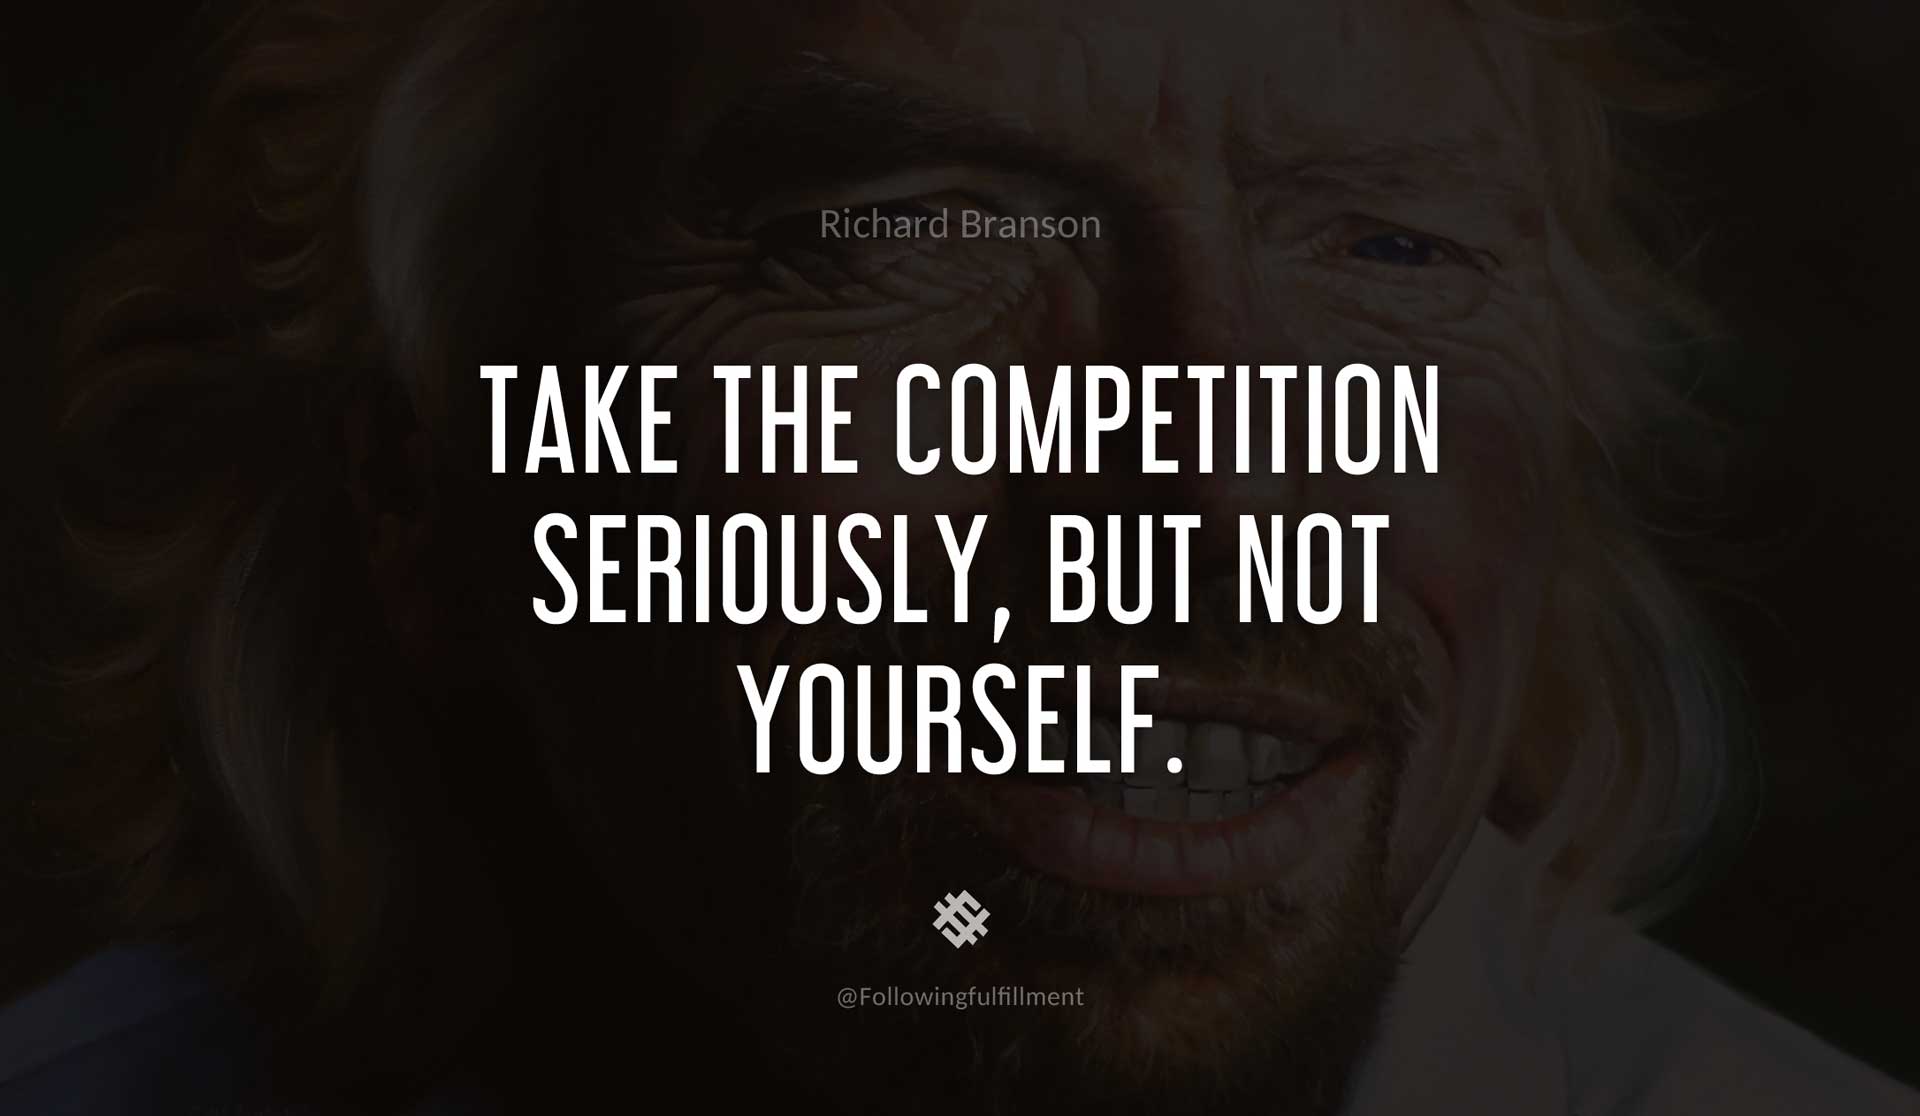 Take-the-competition-seriously,-but-not-yourself.-RICHARD-BRANSON-Quote.jpg